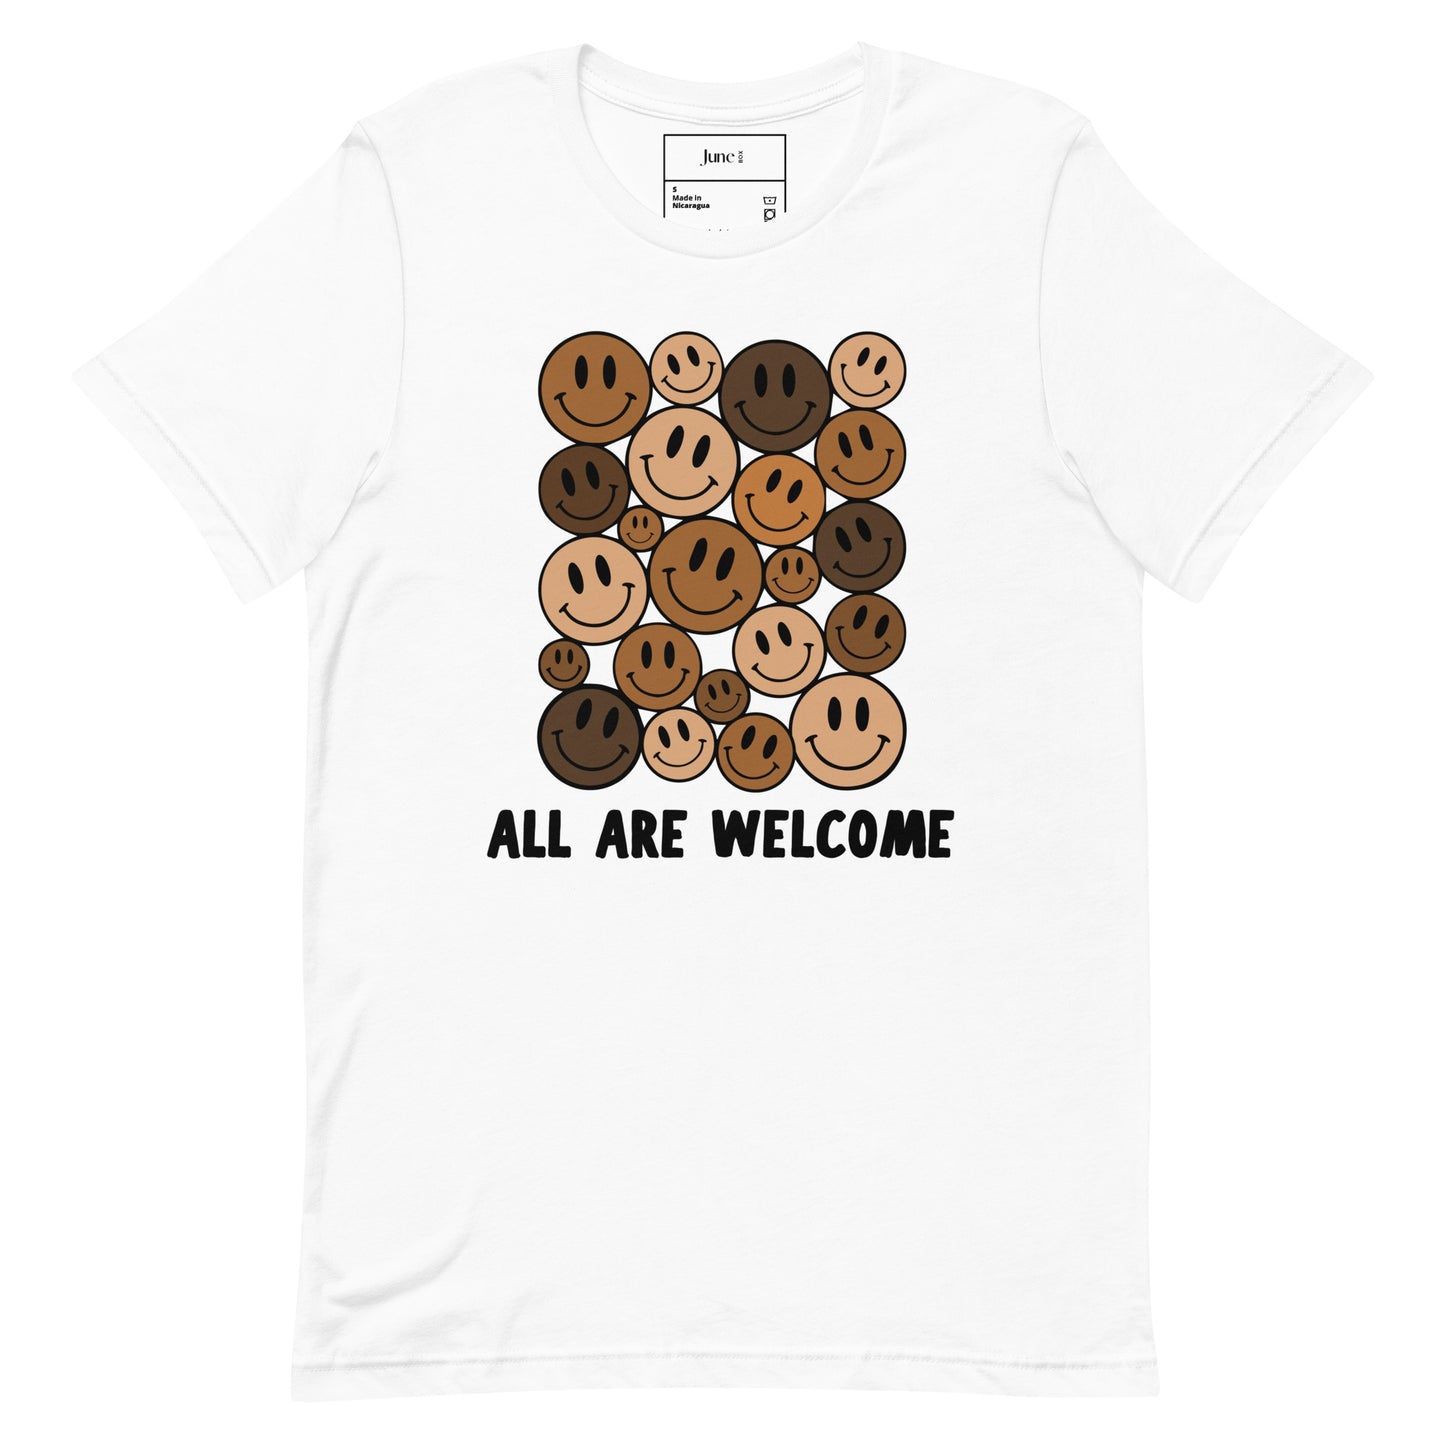 All Are Welcome Tshirt